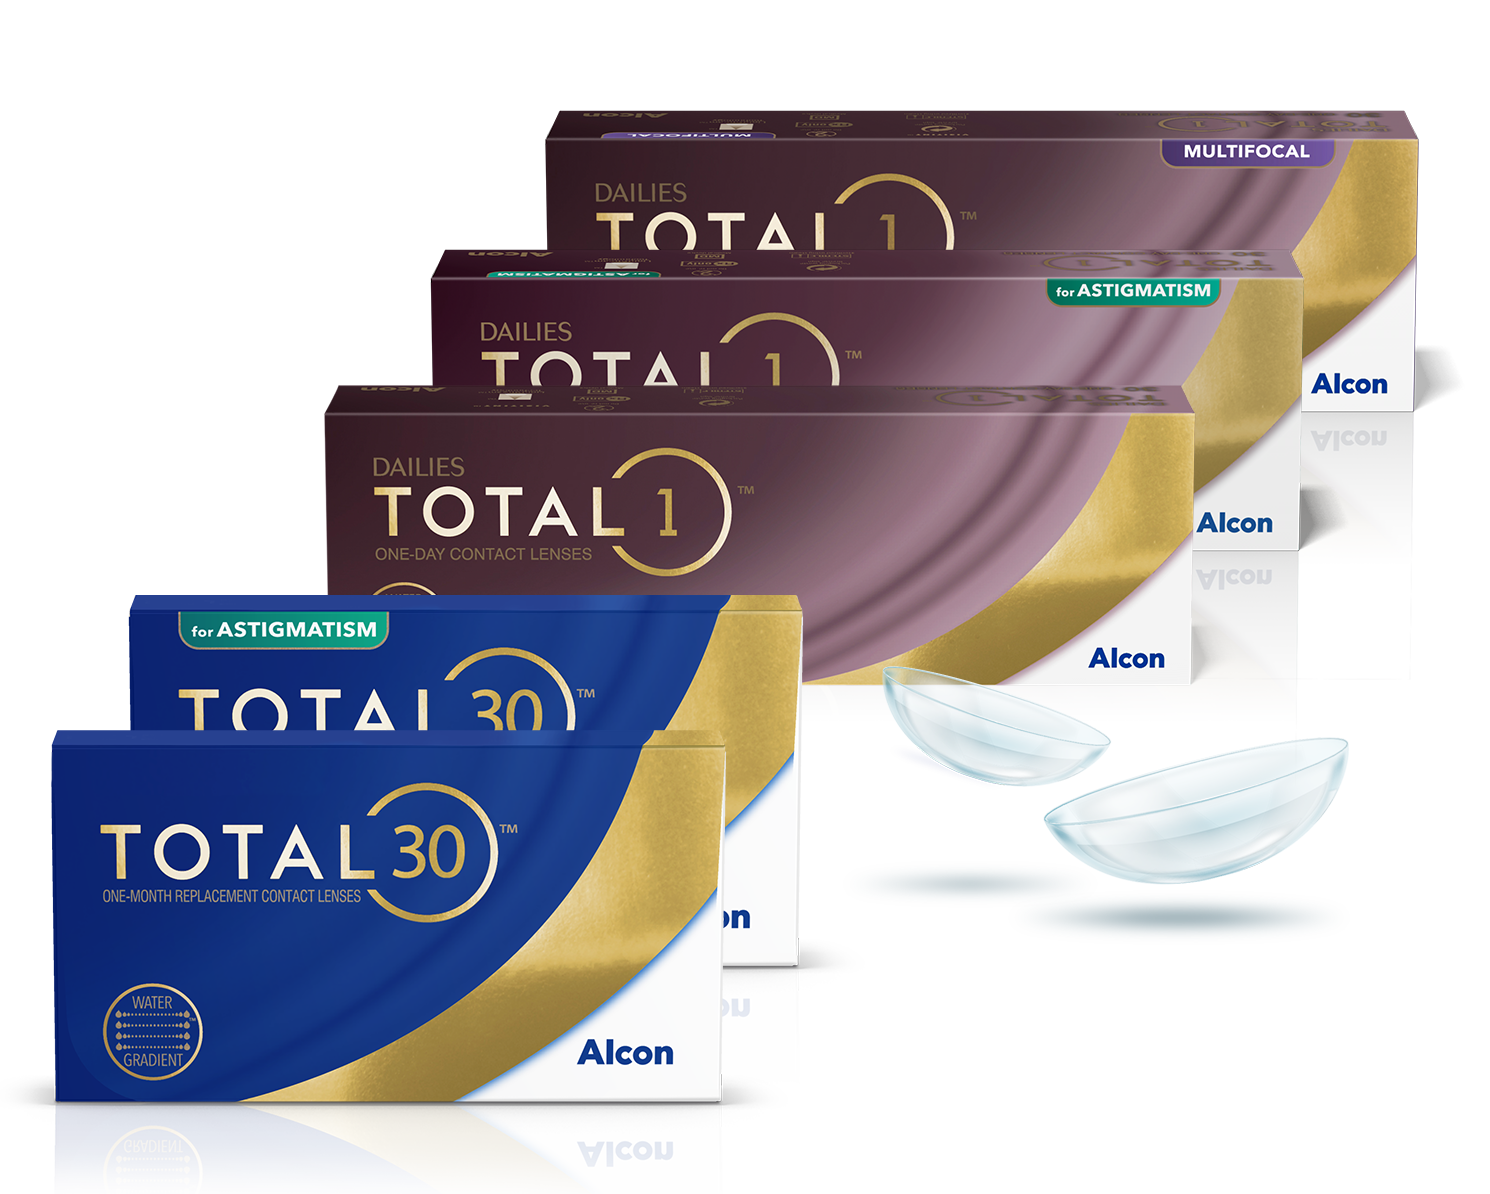 Family contact lens product box shots for Total including Dailies Total1, Dailies Total1 Multifocal, Dailies Total1 for Astigmatism, and Total30 monthly lenses